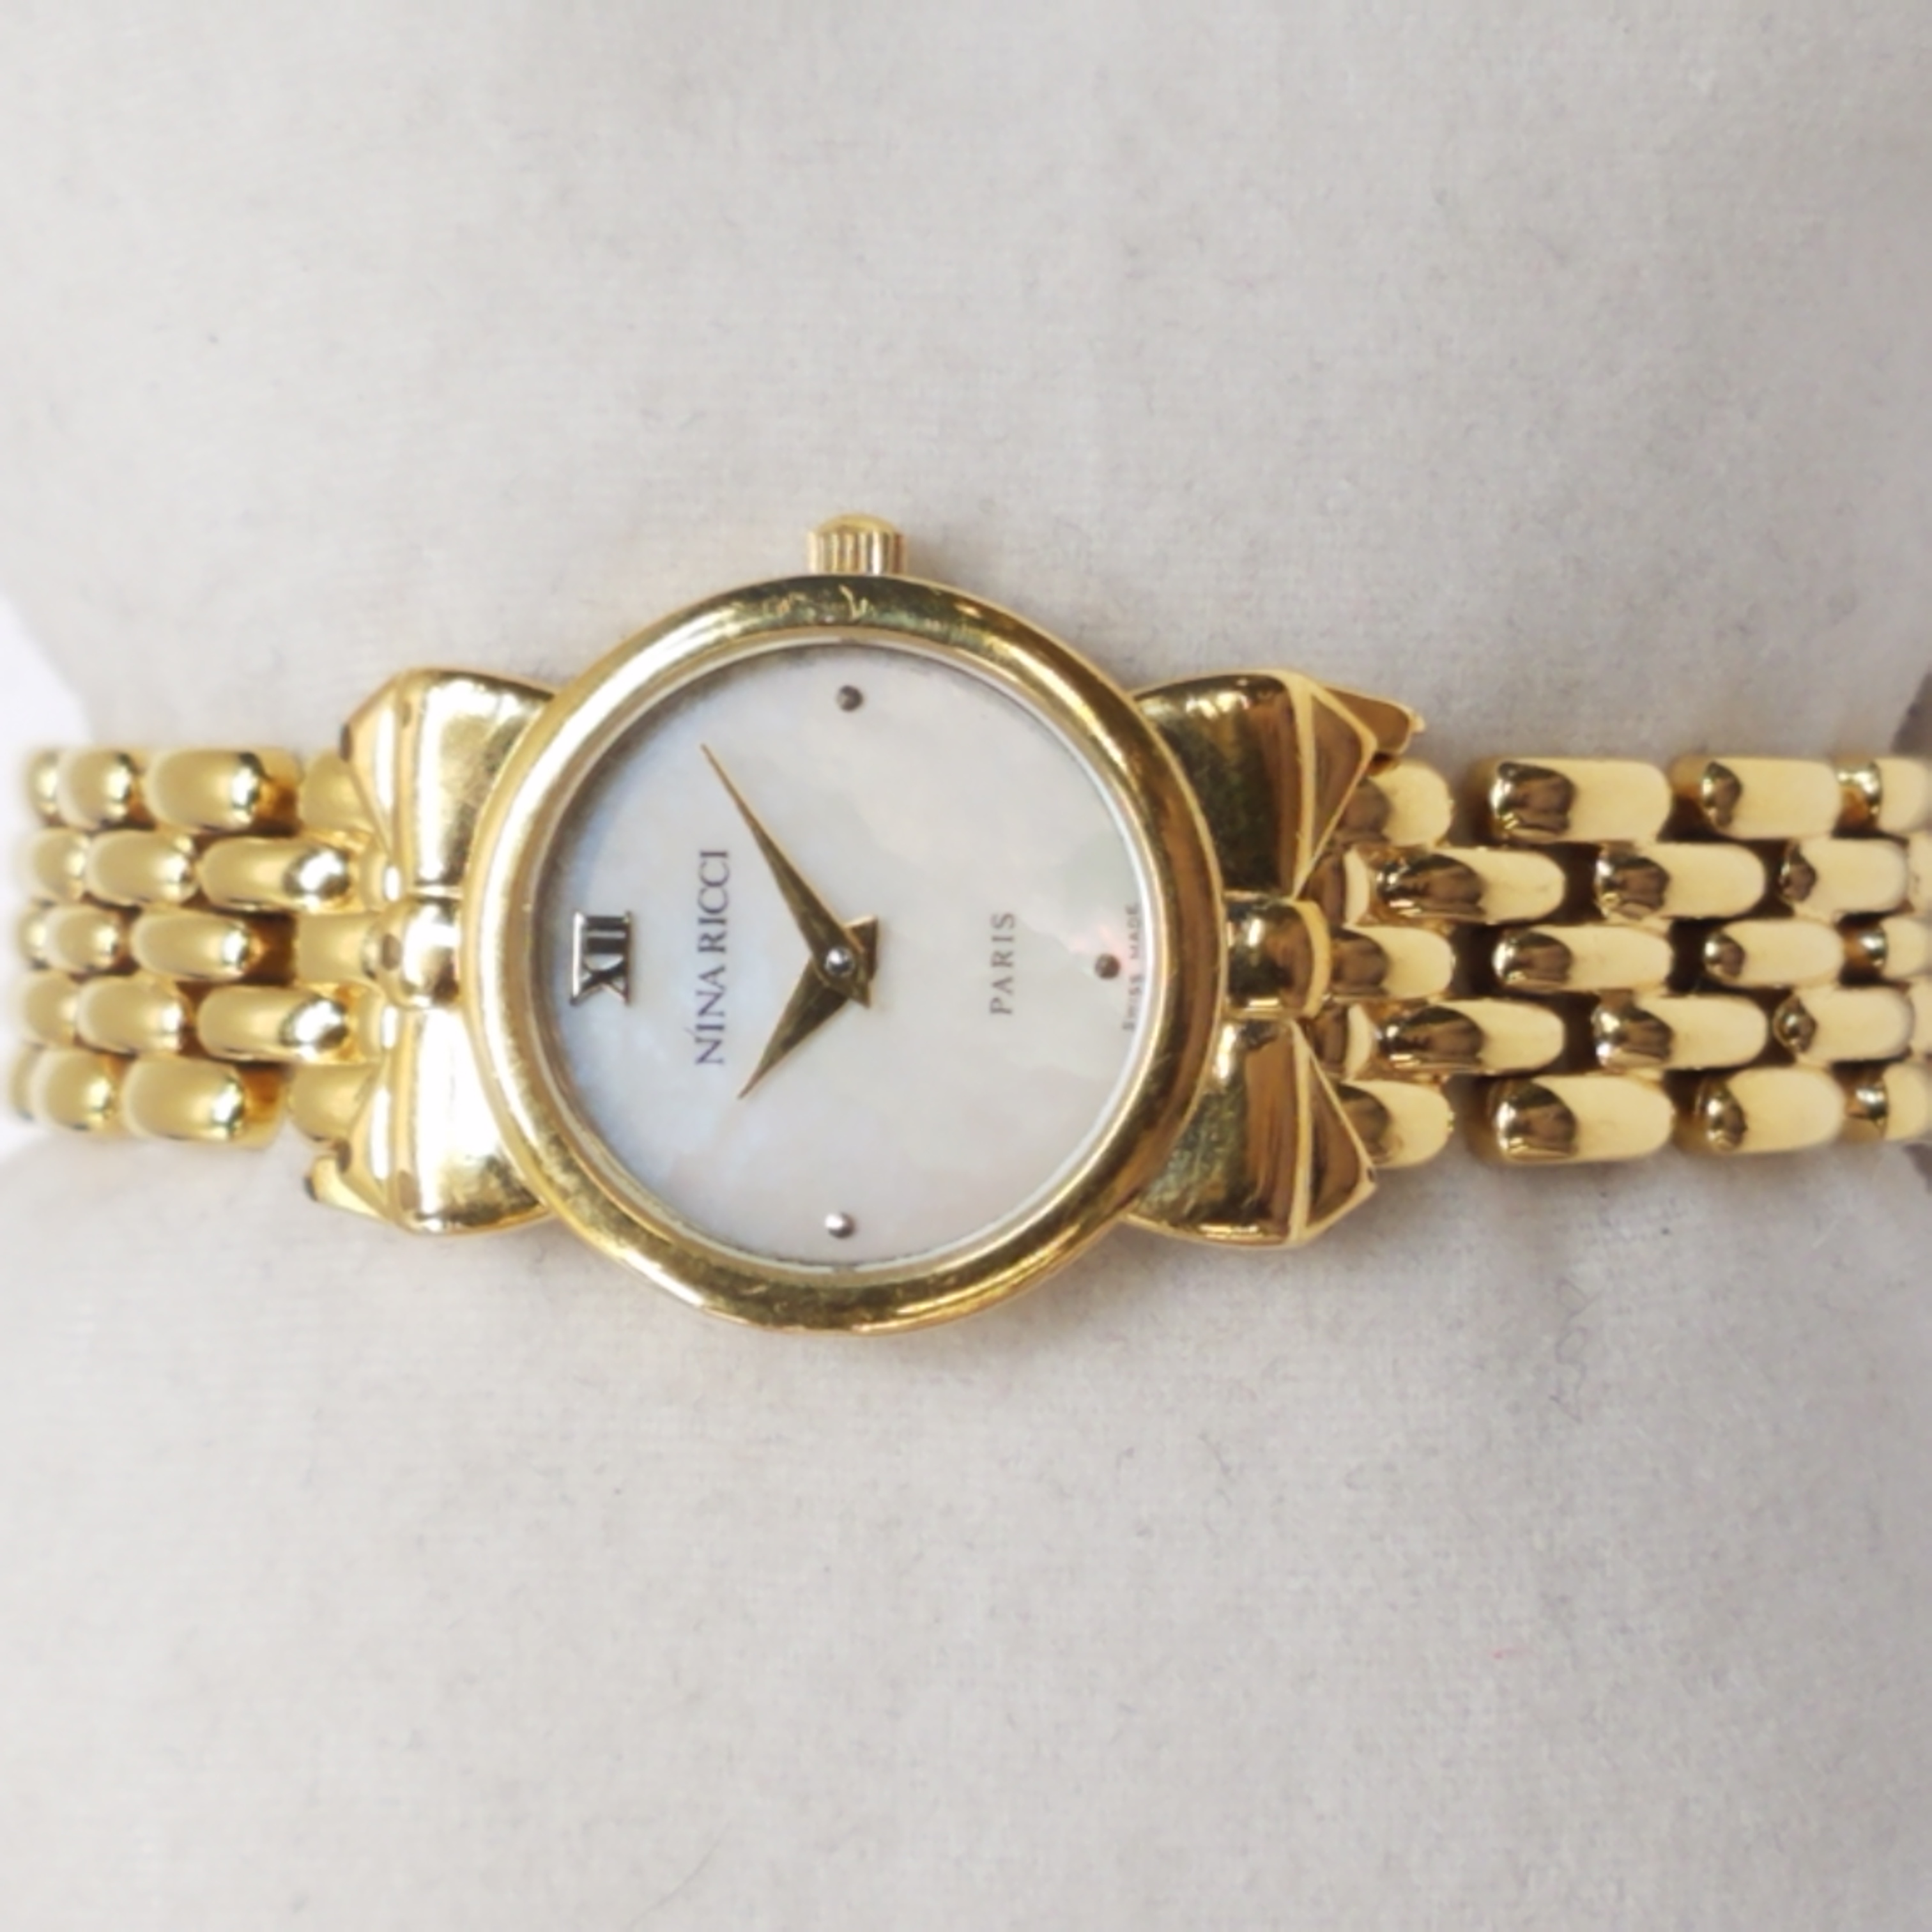 Buy the Nina Ricci 30405/S953 Gold Plaque Or Gio MC W/ MOP Dial Watch ...